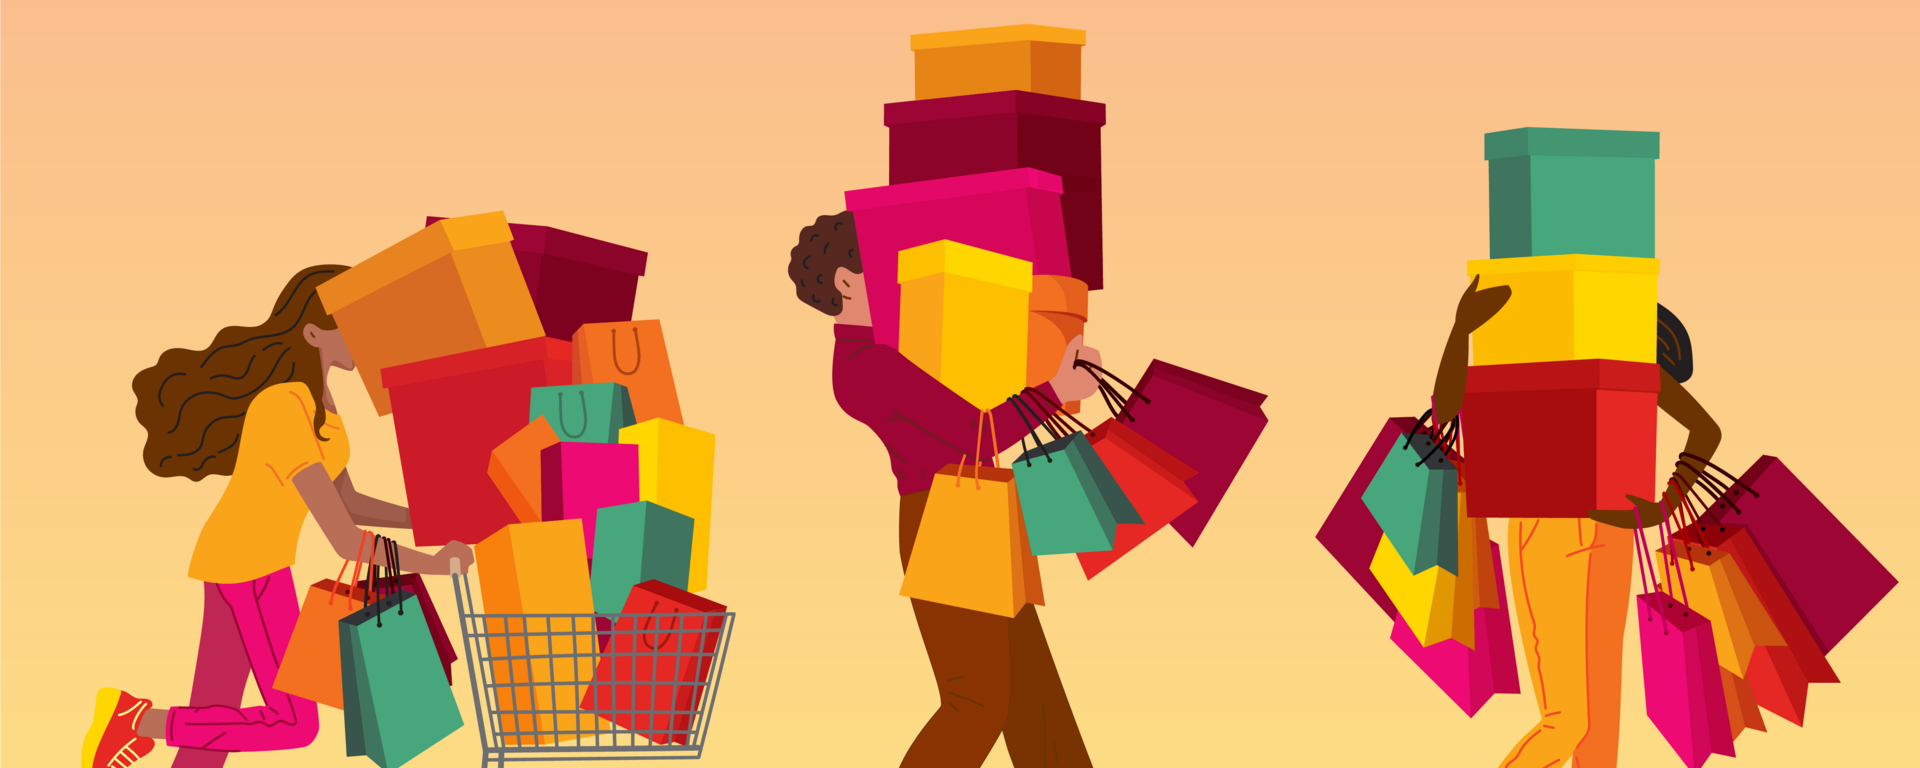 animation of three people with shopping bags